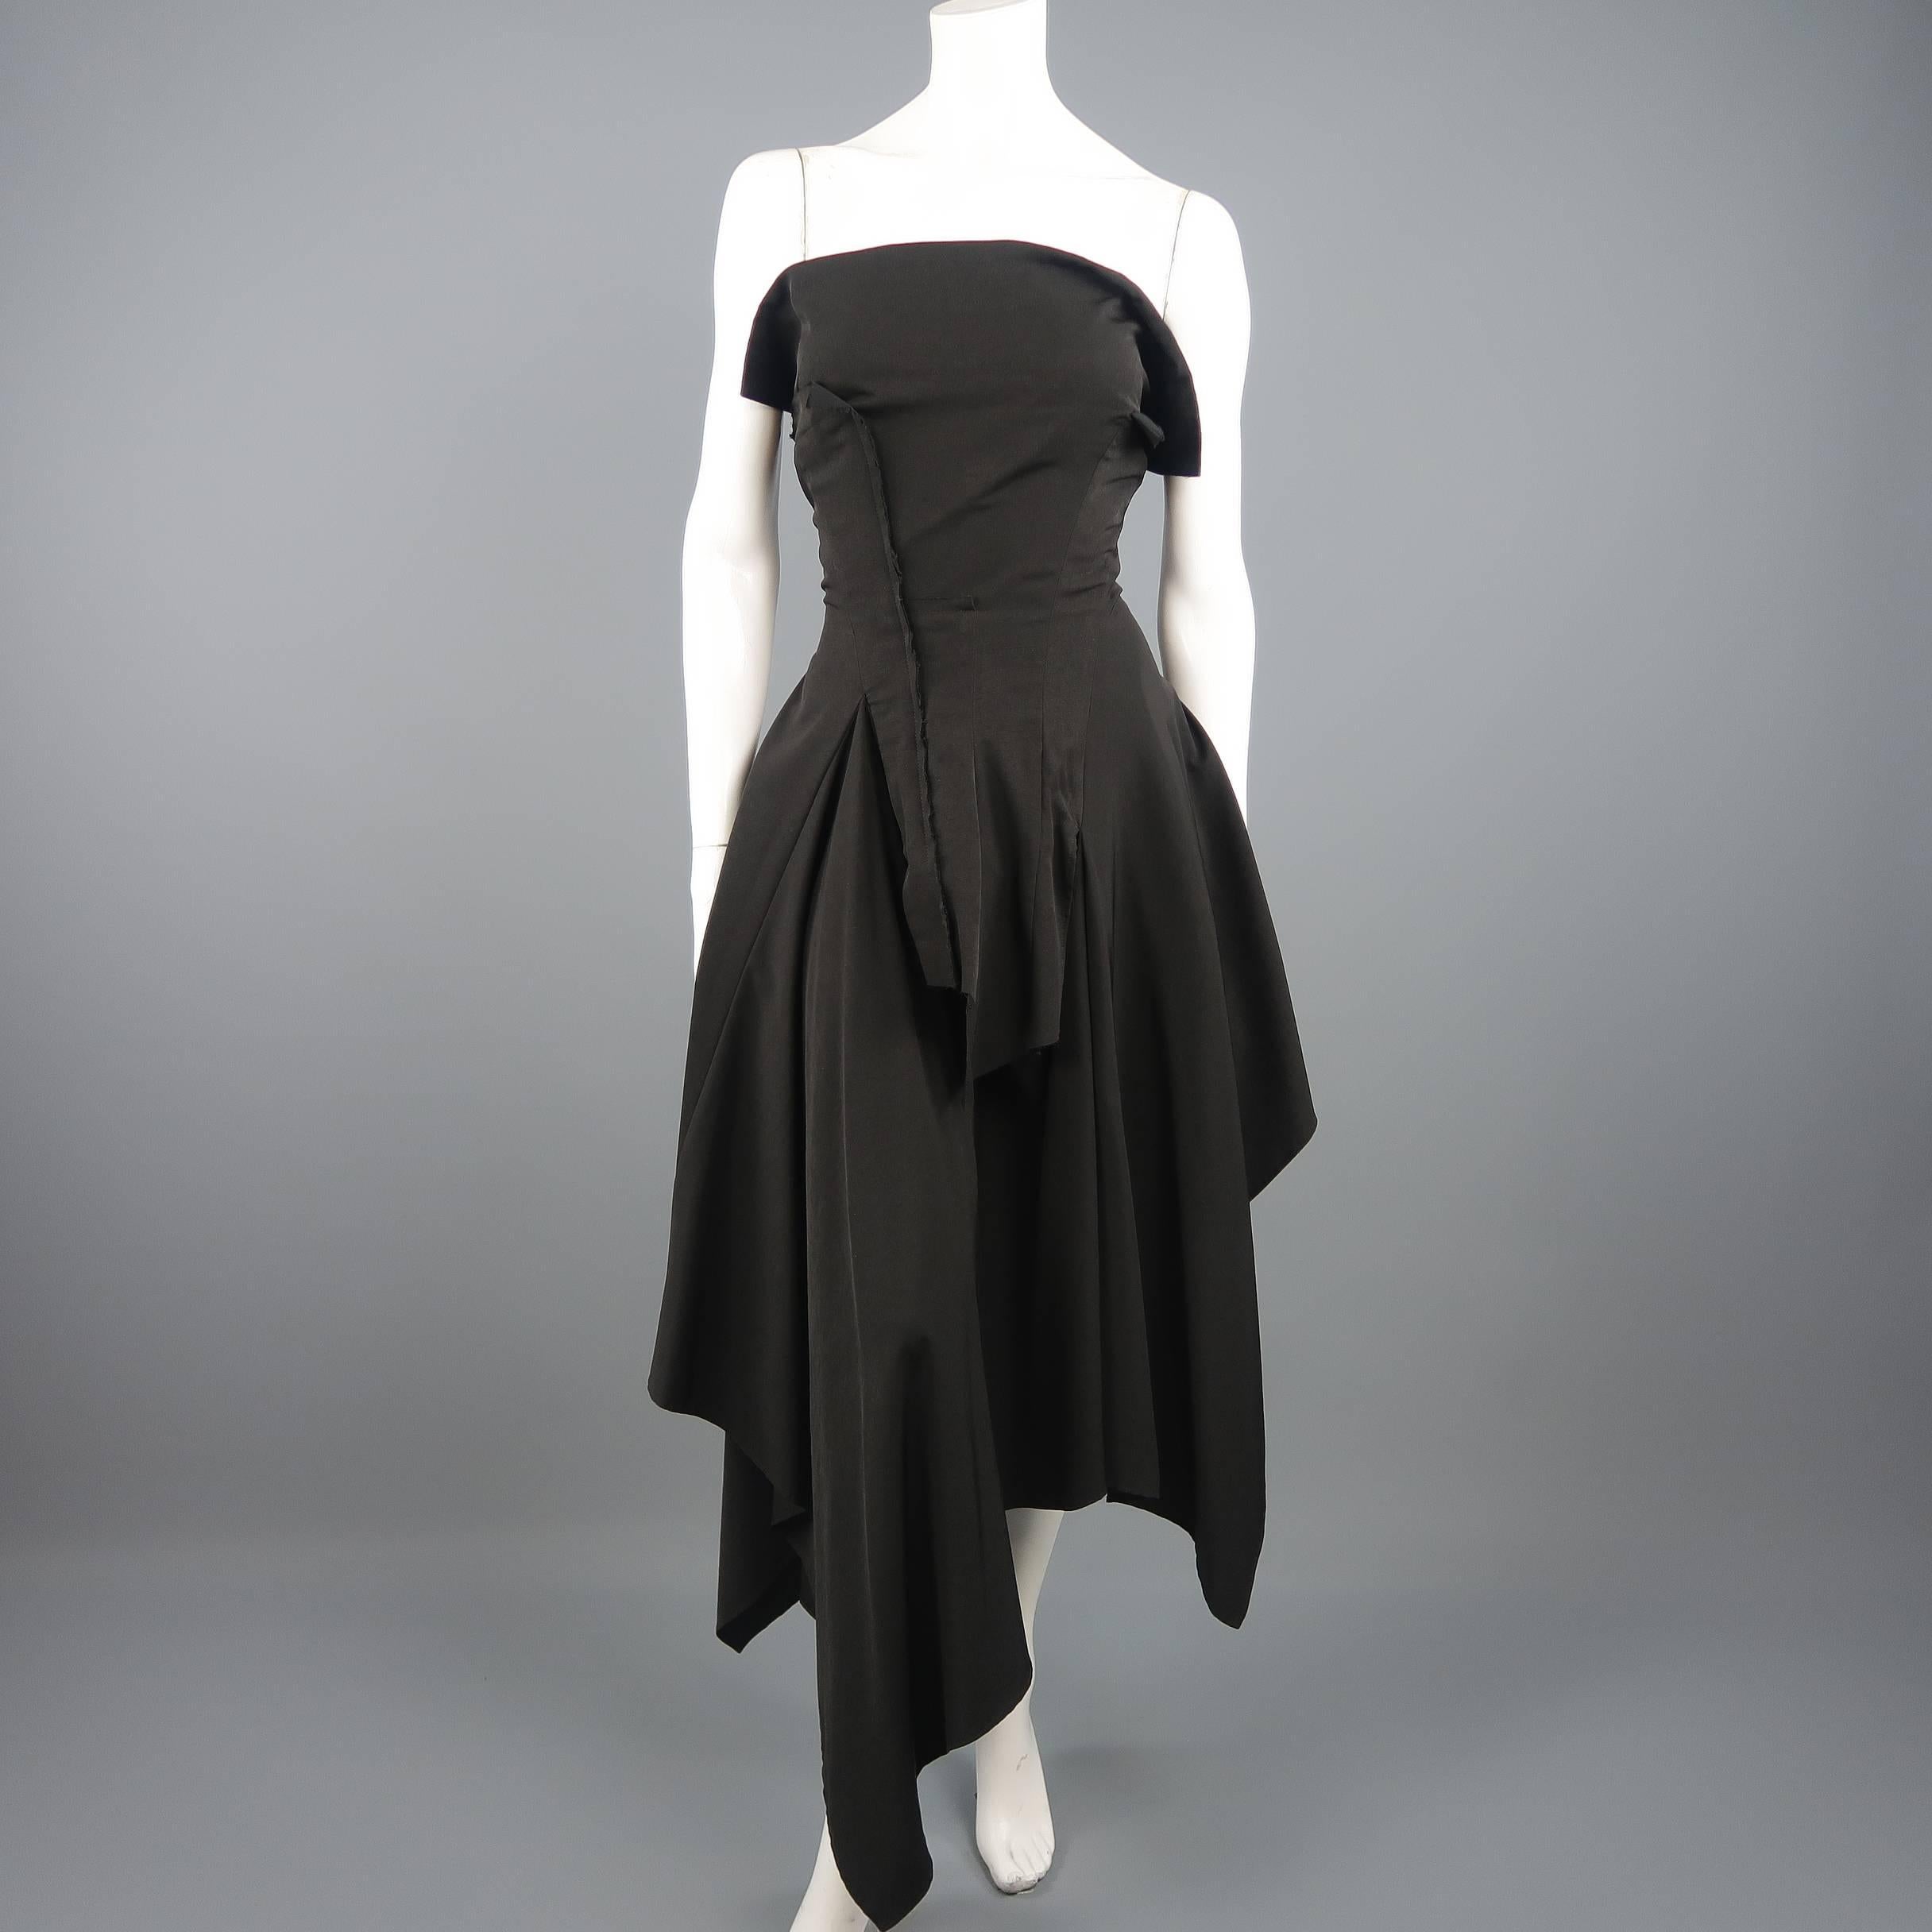 YOHJI YAMAMOTO dress features a deconstructed patchwork boned bustier bodice with high flap front, laced back details, and asymmetrical layered ruffle skirt. Made in Japan.
 
Excellent Pre-Owned Condition.
Marked: JP 3
 
Measurements:
 
Bust: 34